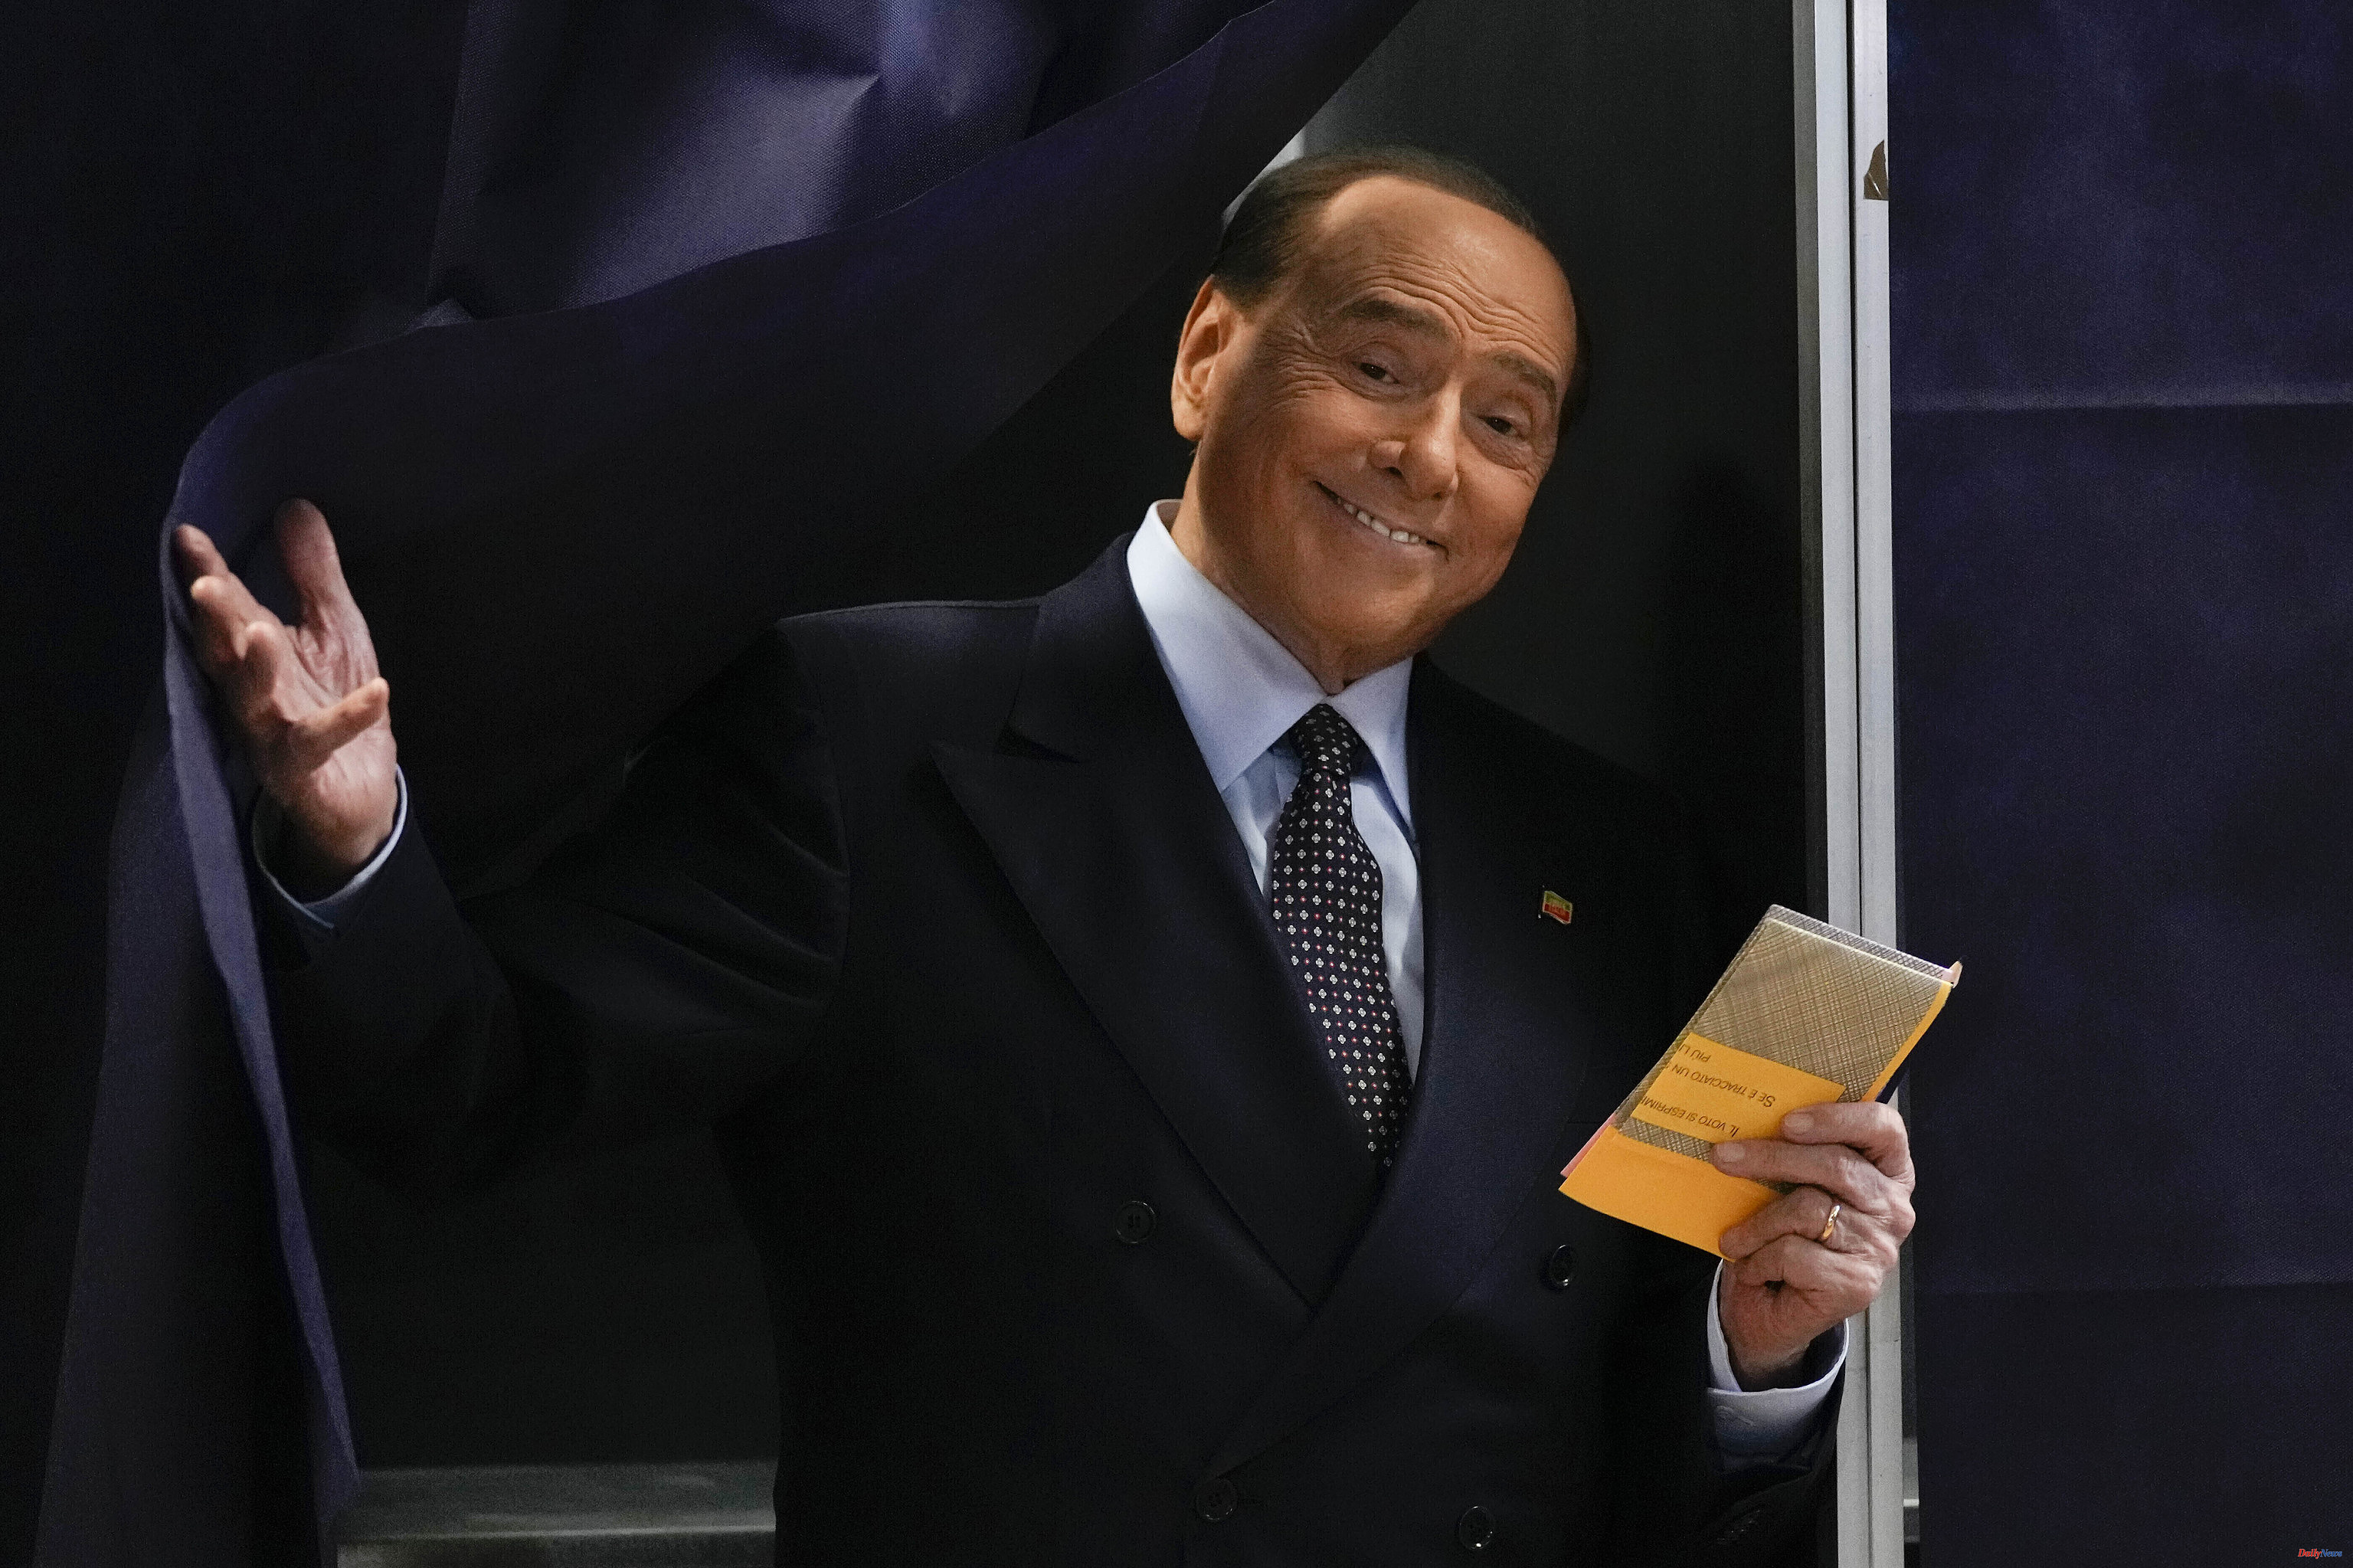 Italy Berlusconi remains stable and would have asked to return home